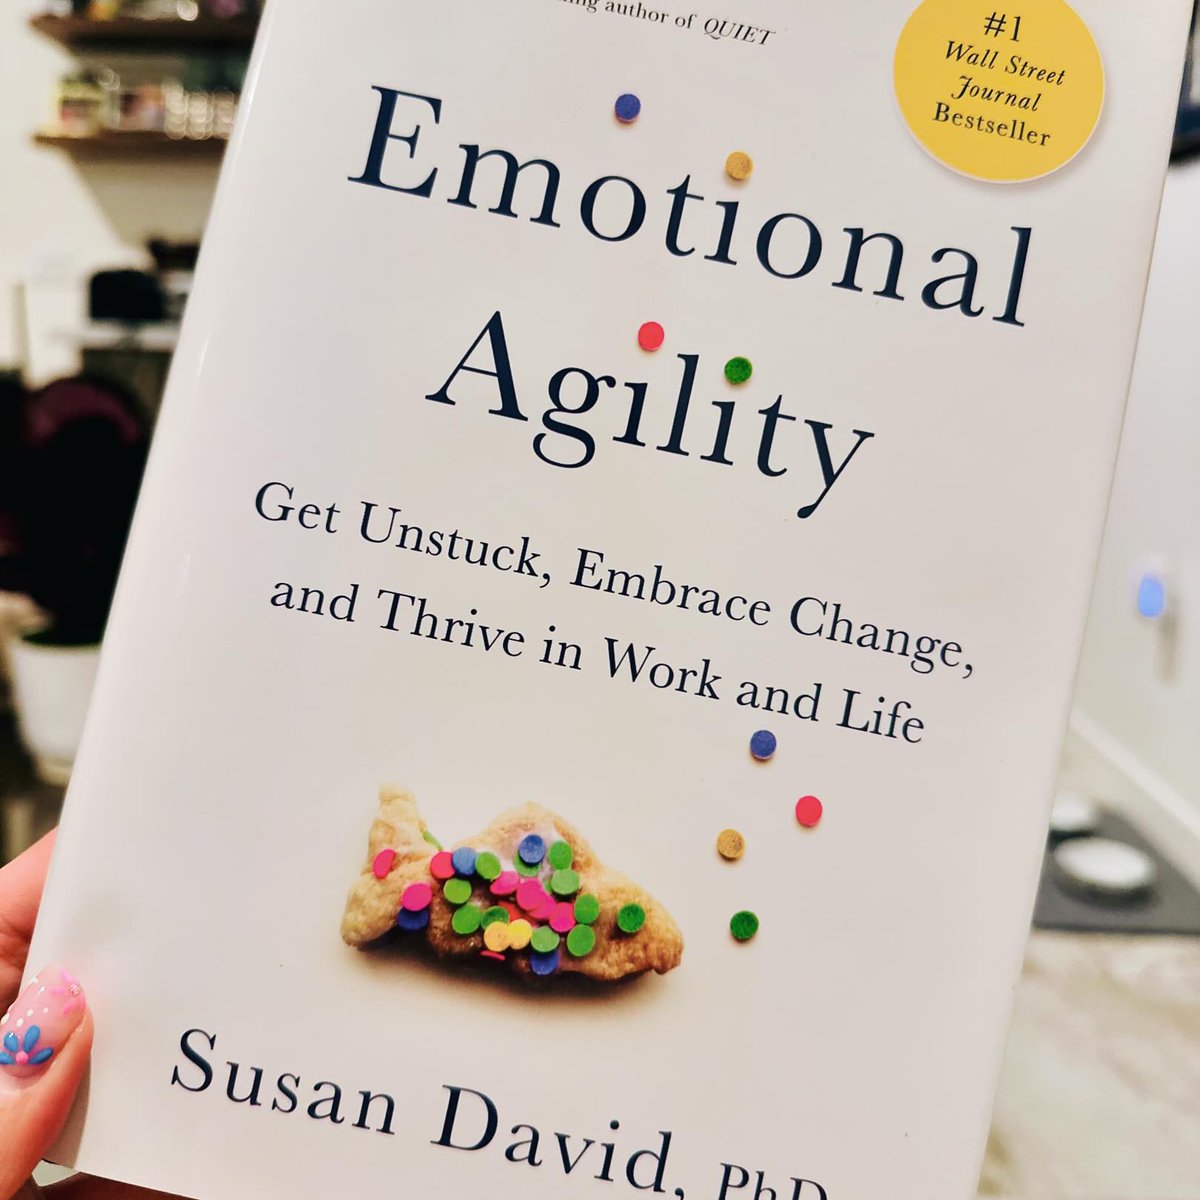 Emotional Agility helps us to navigate life’s twists and turns with self-acceptance, clear-sightedness, and an open mind. This process isn’t about ignoring difficult emotions and thoughts. It’s about holding those emotions and thoughts loosely, facing them with courage and